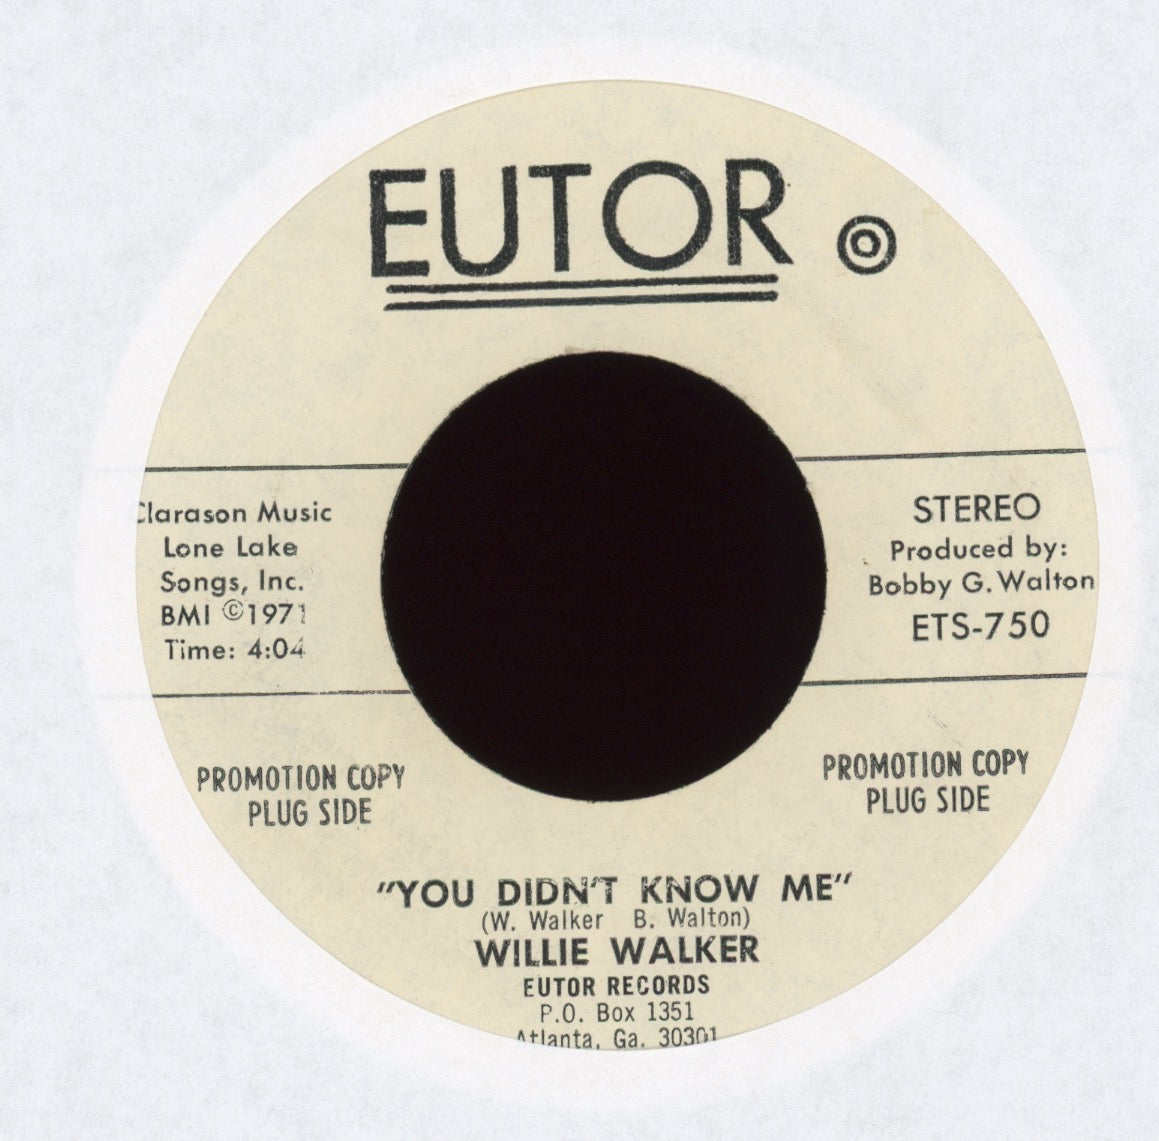 Willie Walker - Tell Me Baby, It's Gonna Be Alright on Eutor Promo